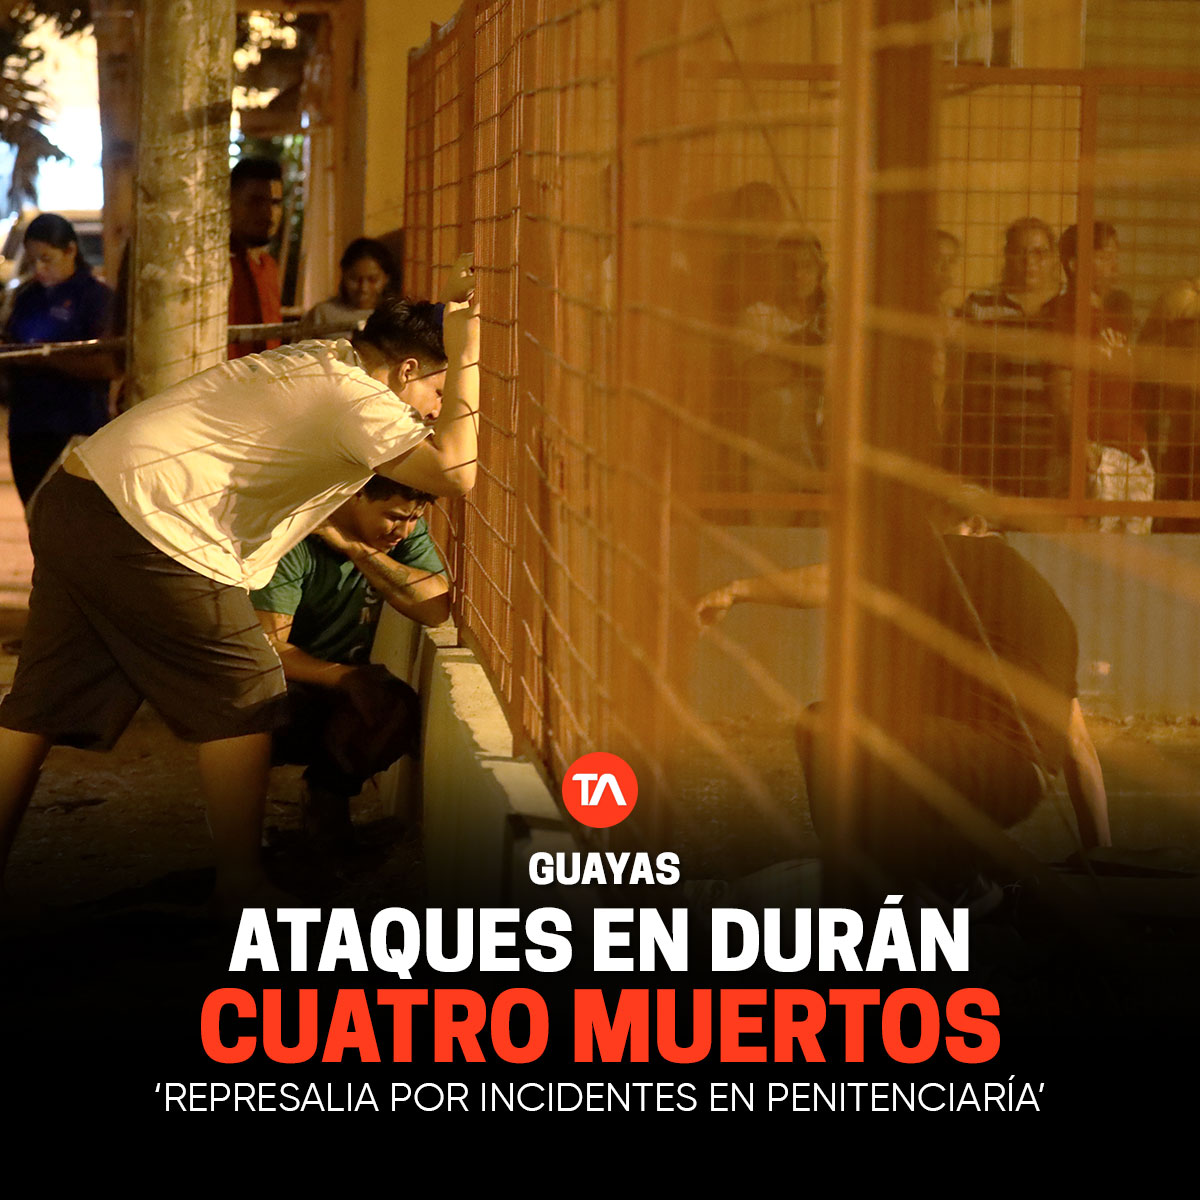 Four dead and four injured during violent attacks in Duran